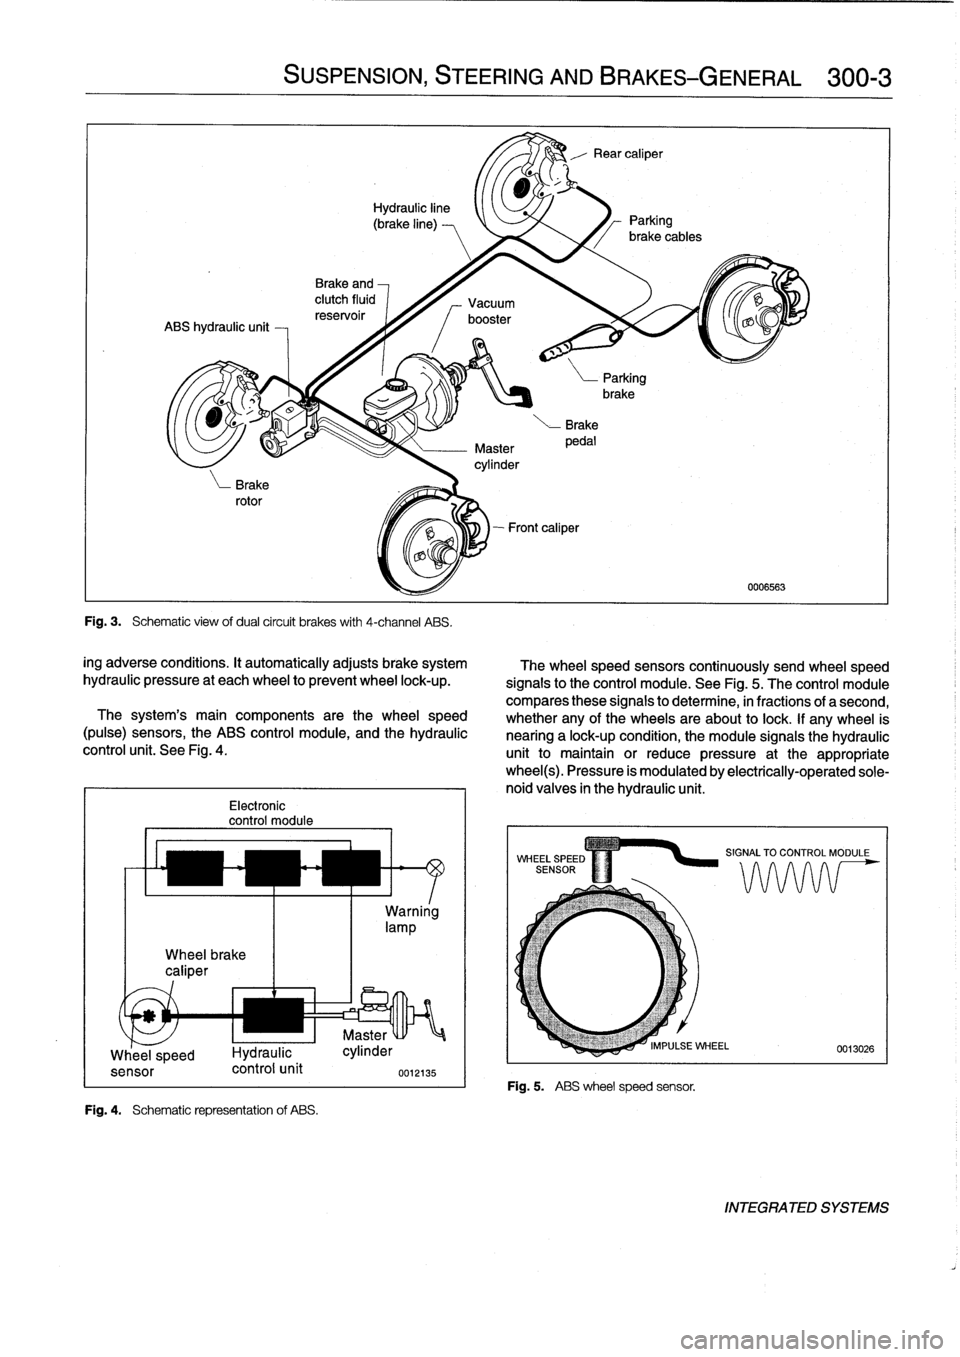 BMW 318i 1997 E36 User Guide 
Wheel
brake
caliper

Electronic
control
module
Fig
.
4
.

	

Schematic
representation
of
ABS
.

SUSPENSION,
STEERING
ANDBRAKES-GENERAL

	

300-3

Fig
.
3
.

	

Schematic
view
ofdual
circuit
brakes
wi